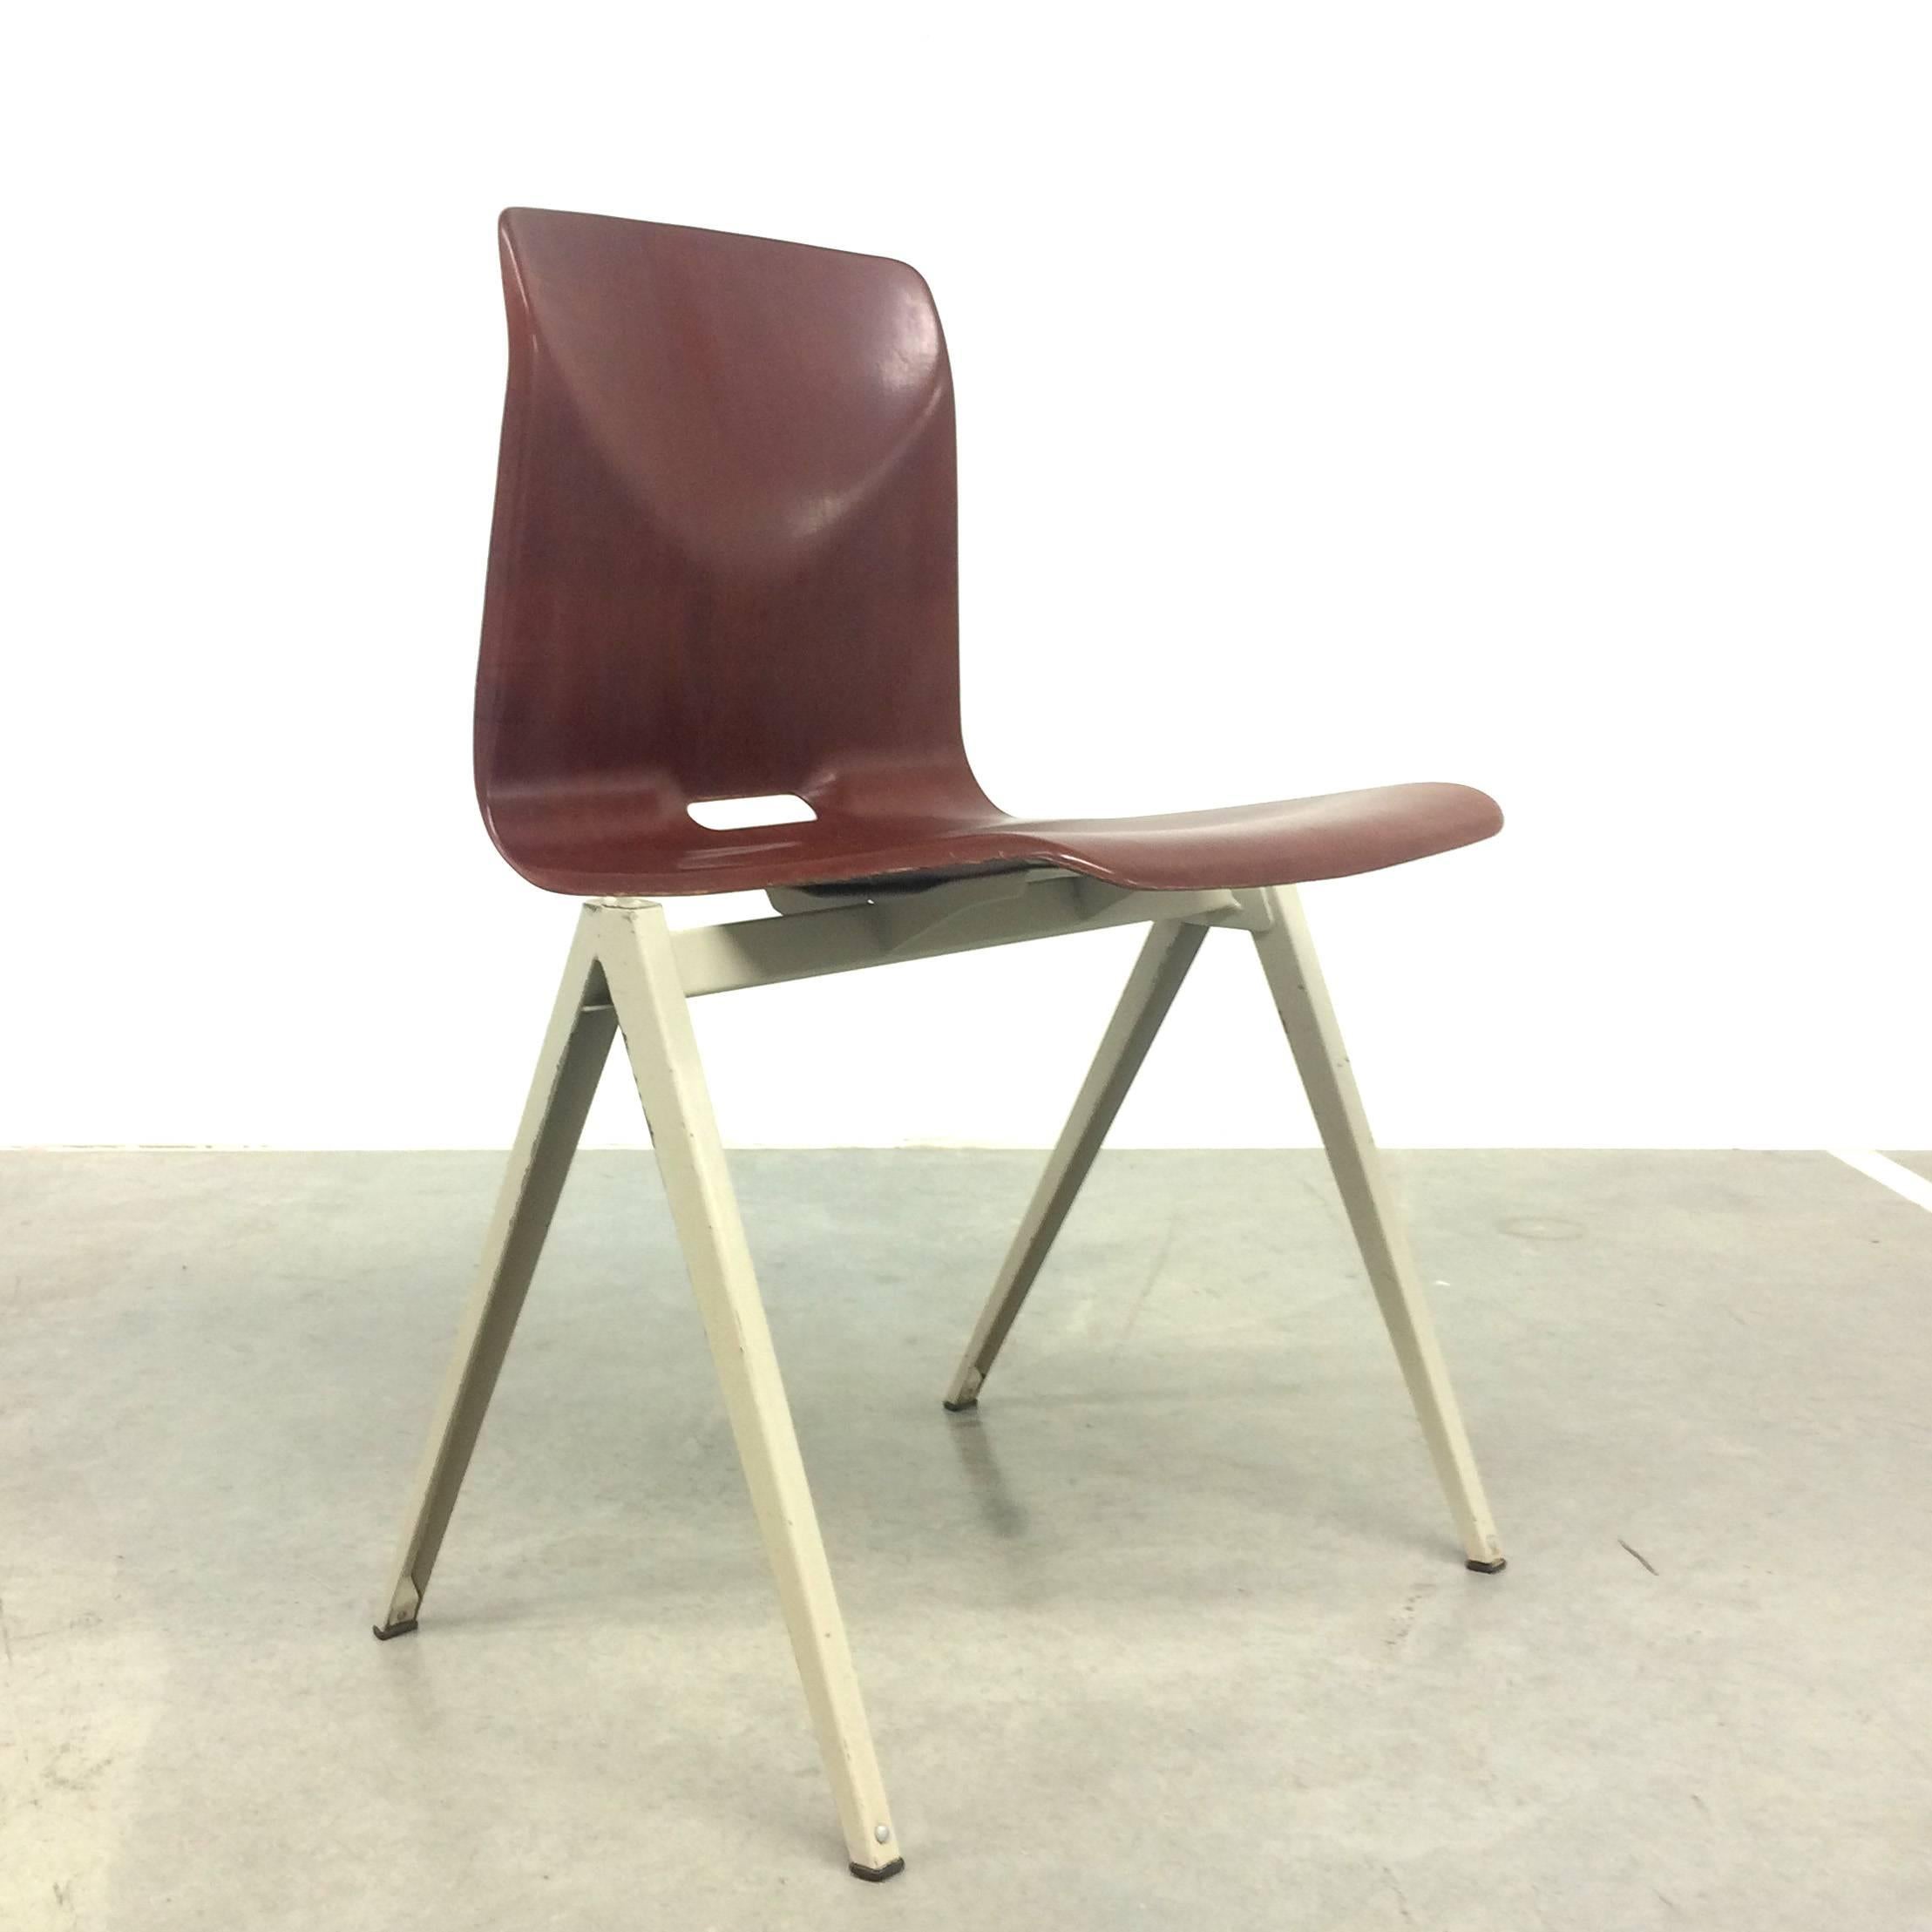 Six Dutch Industrial Design Stacking Chairs from the 1960s In Good Condition For Sale In Cologne, DE